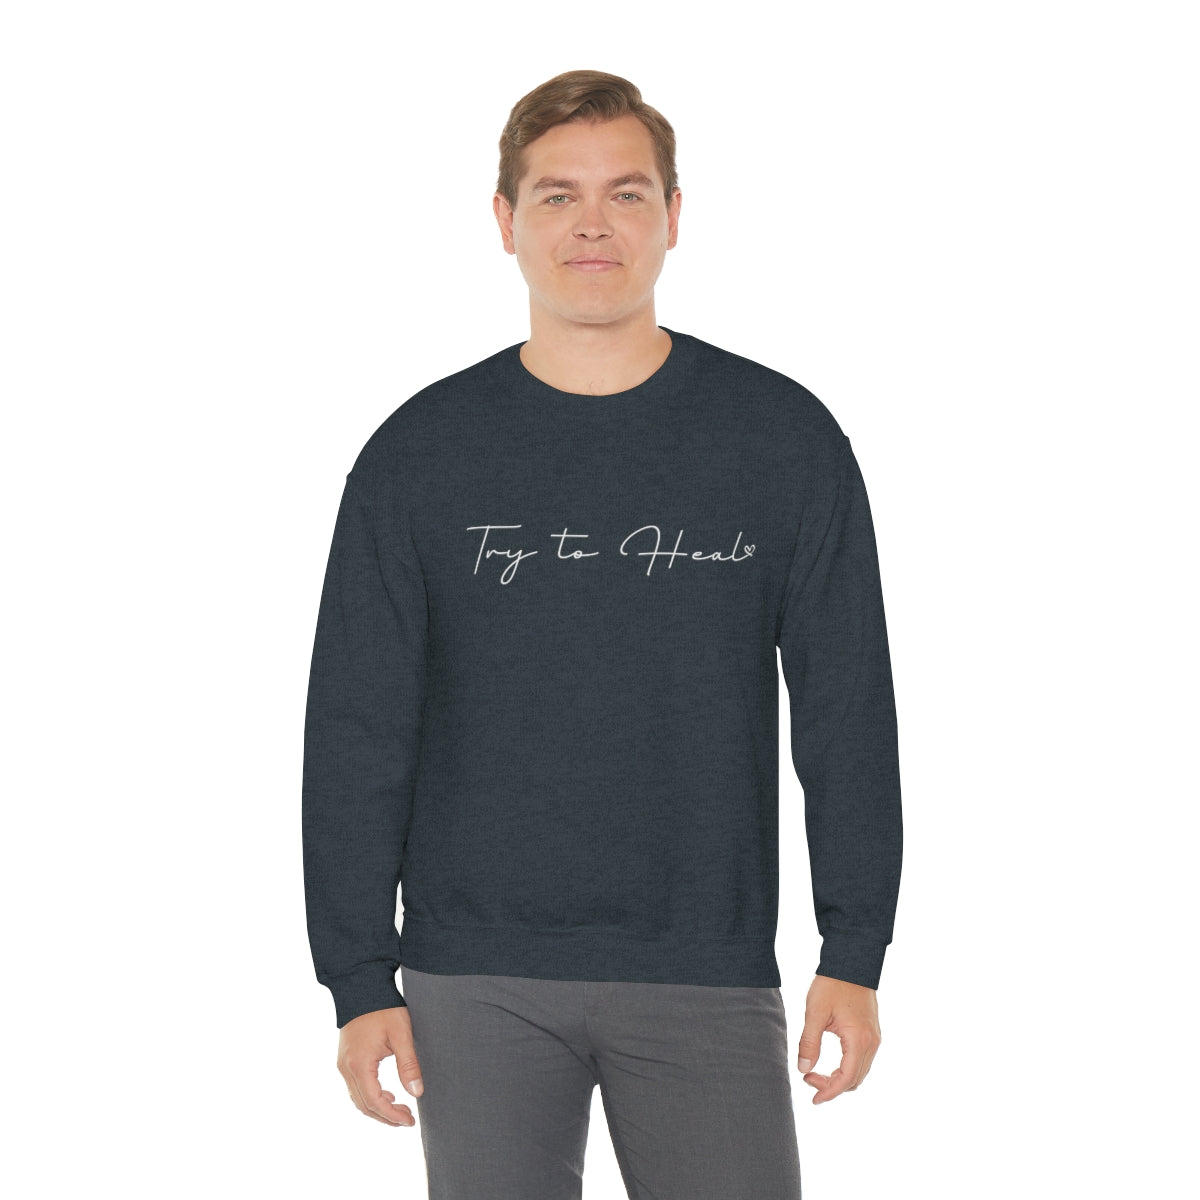 Try To Heal Crewneck Sweater Inspirational Sweatshirt, Sweater, Motivational Sweater, Gift For Women, Trauma Recovery